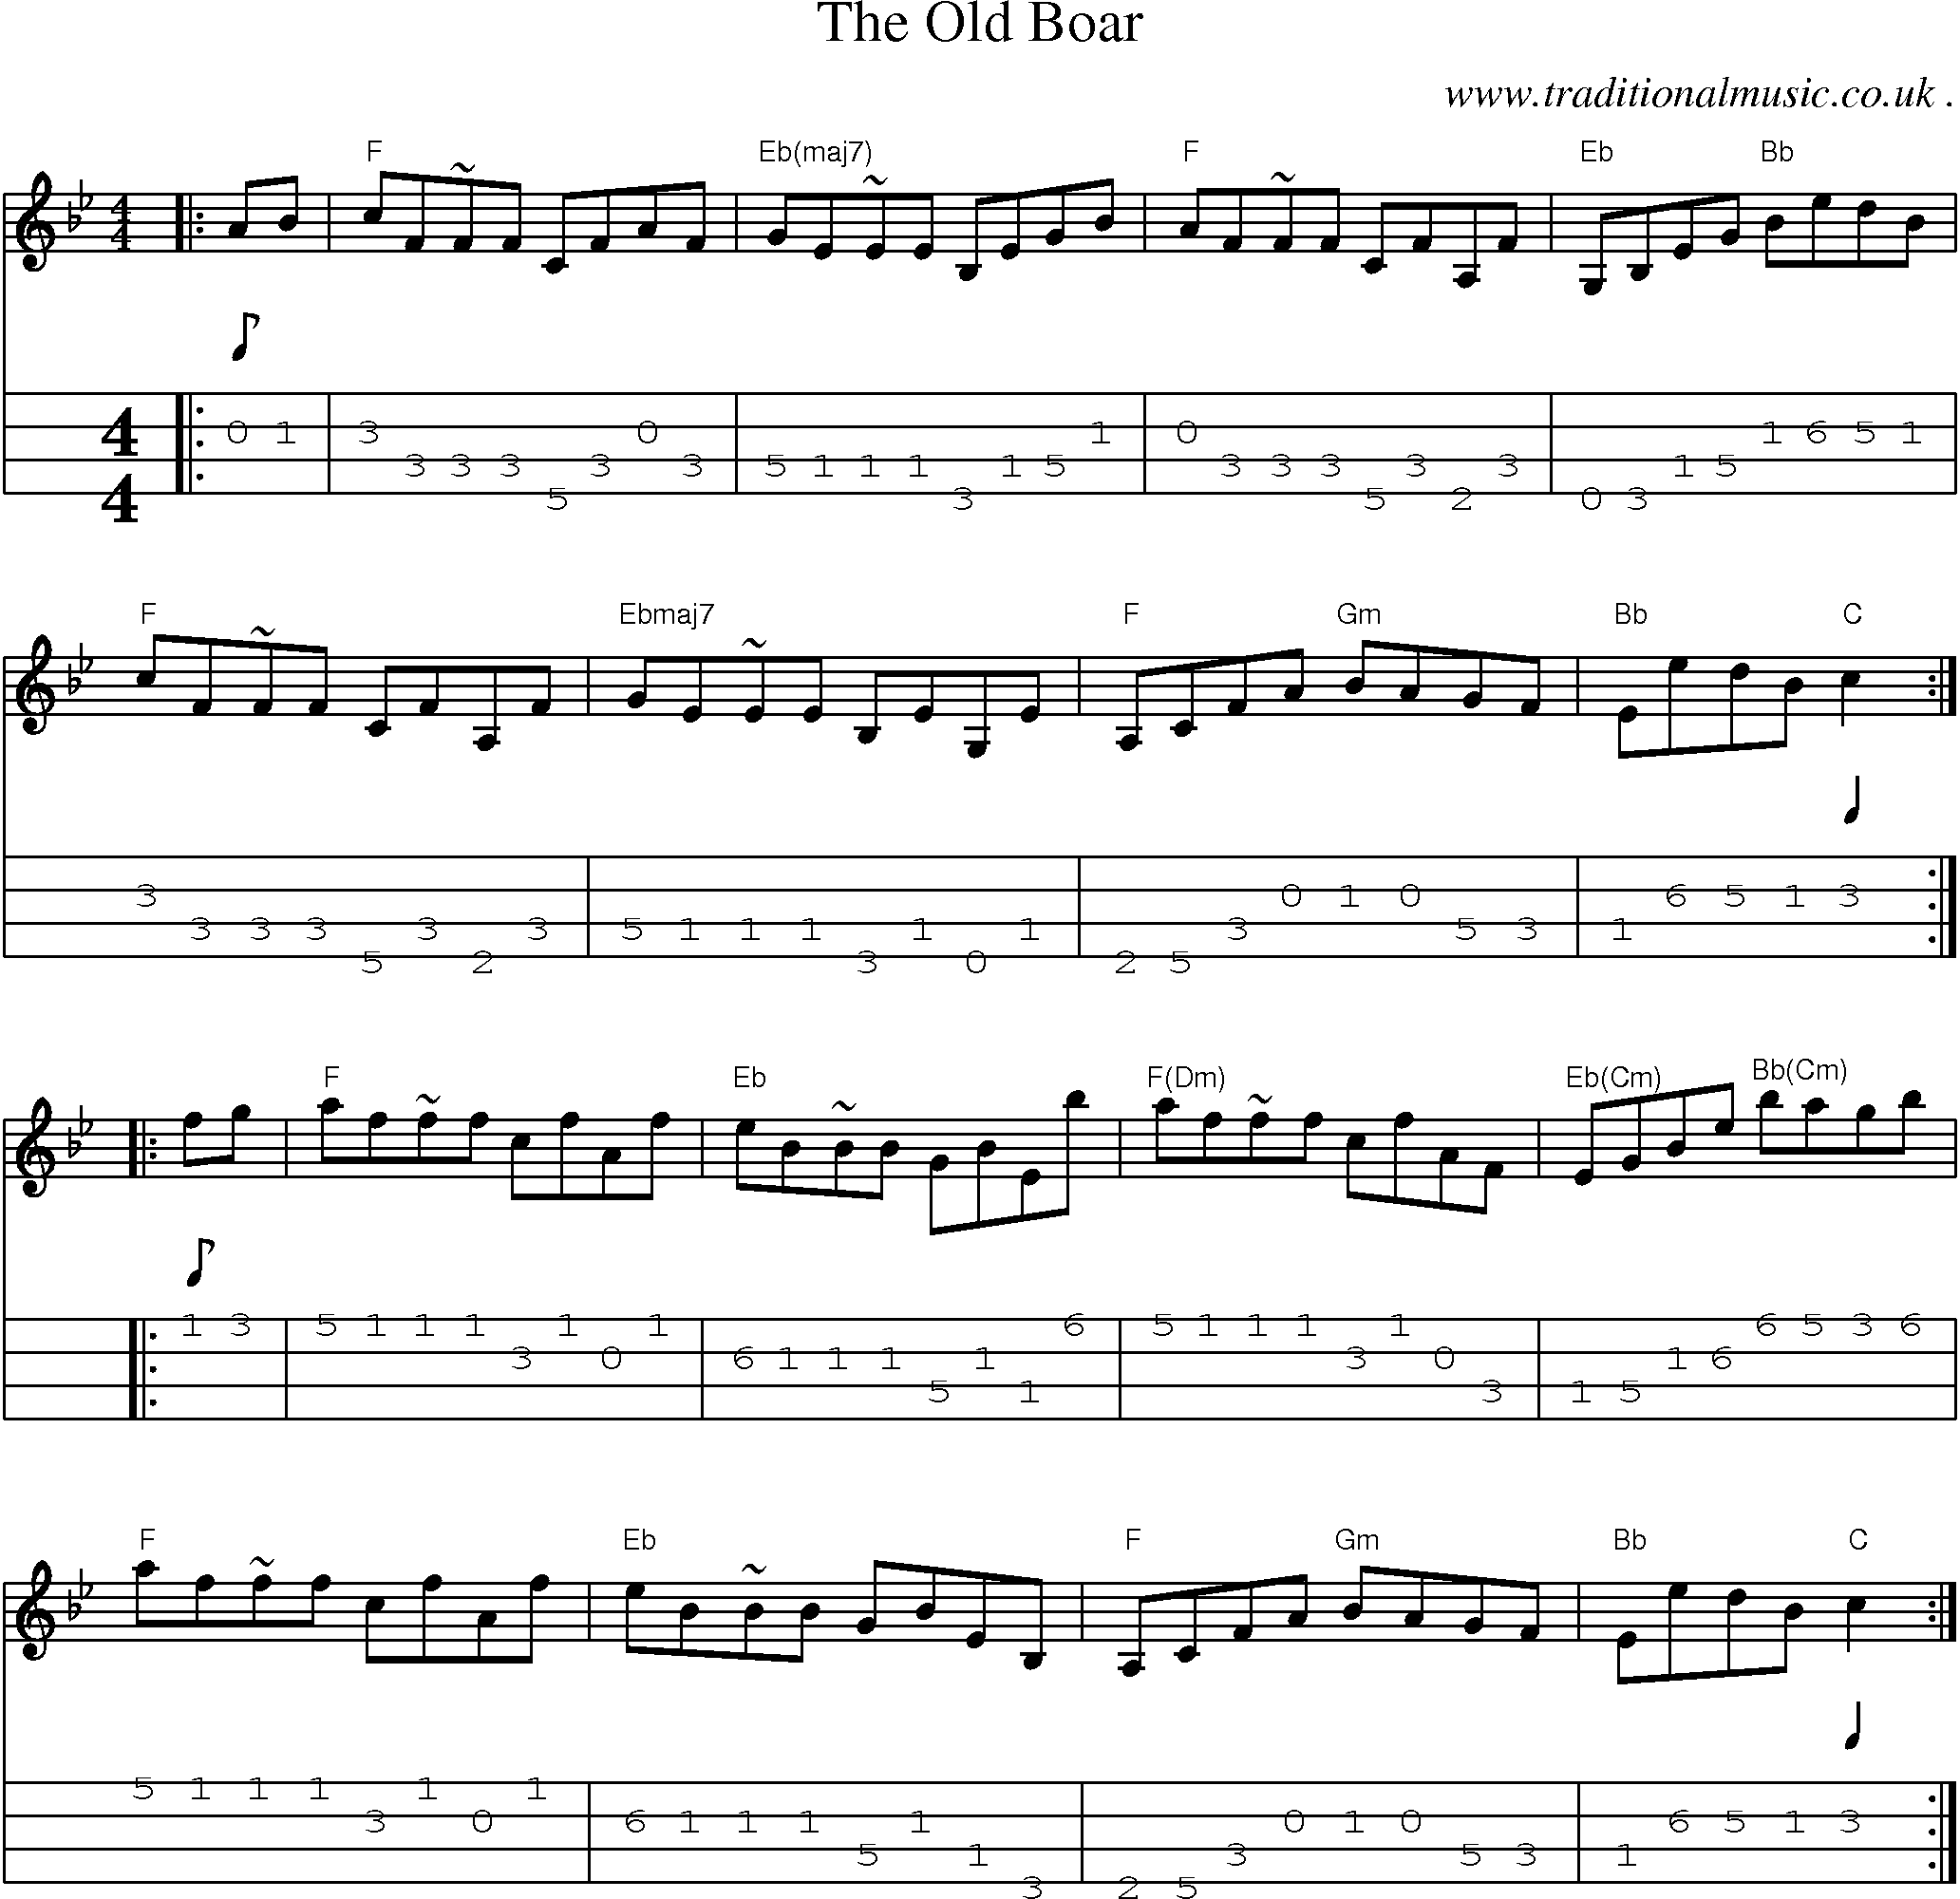 Music Score and Guitar Tabs for The Old Boar